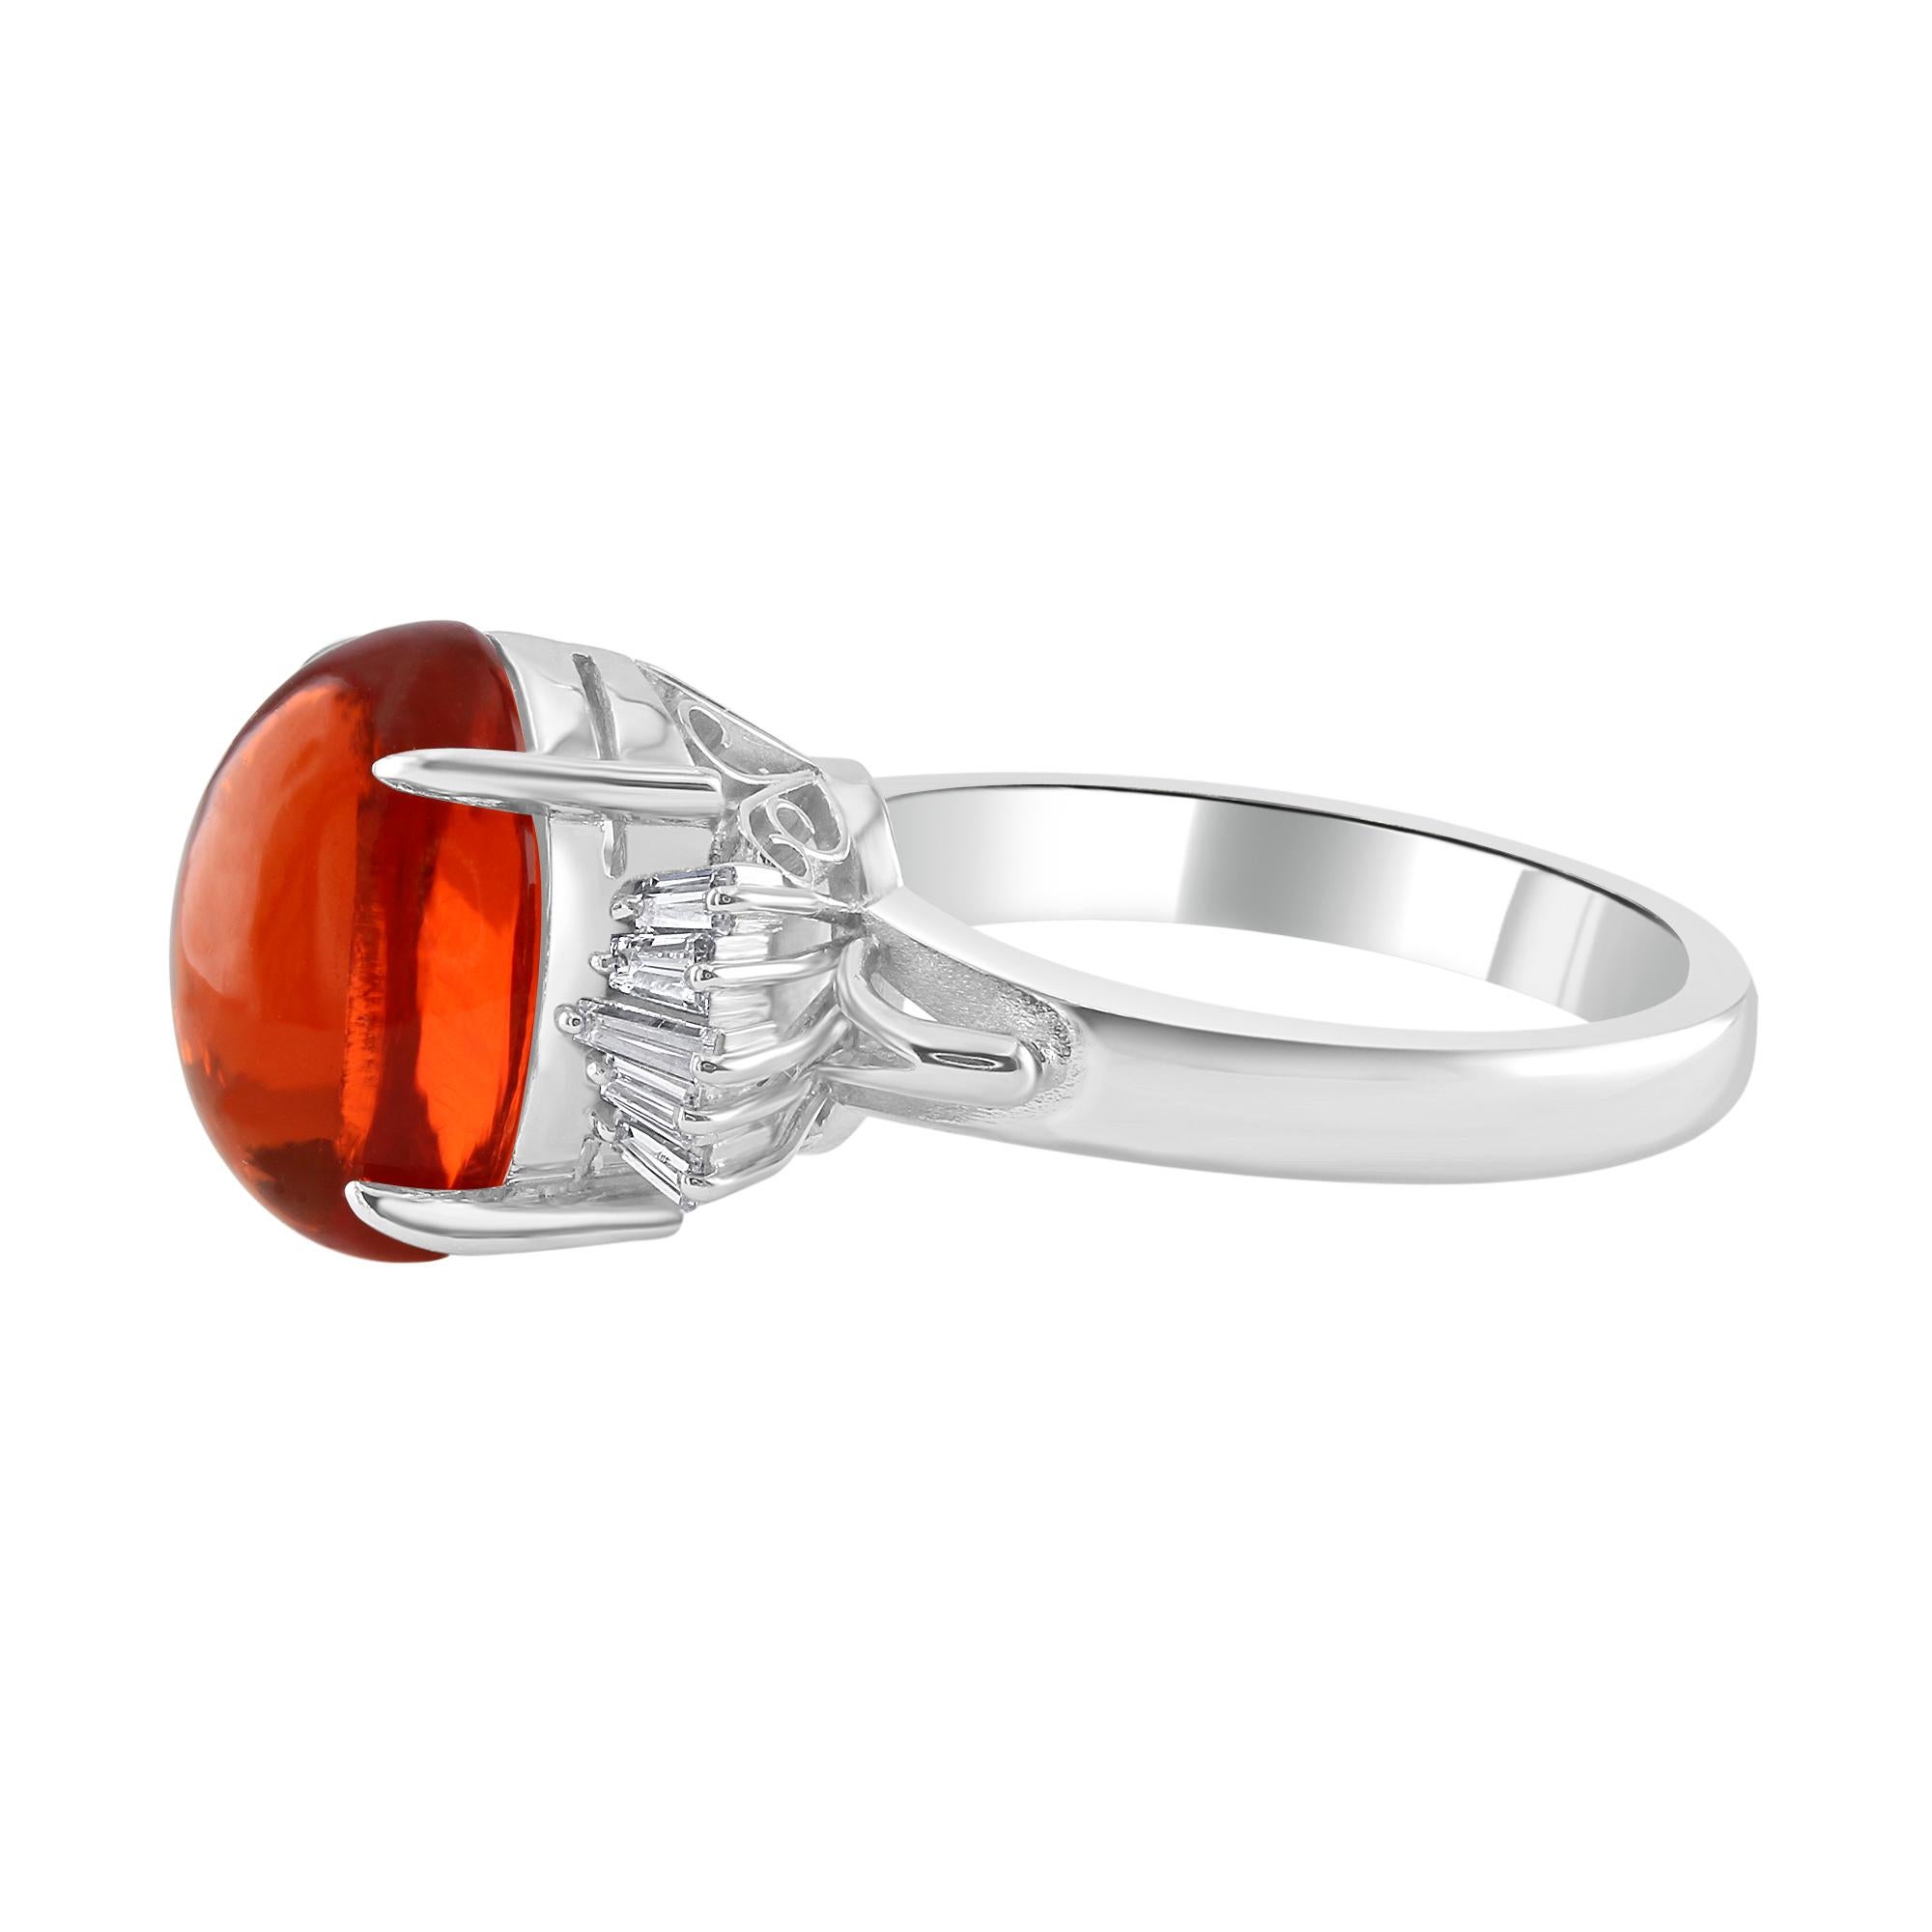 3.92 Carat Mexican Fire Opal Cabochon Ring Set in Platinum In Excellent Condition For Sale In New York, NY